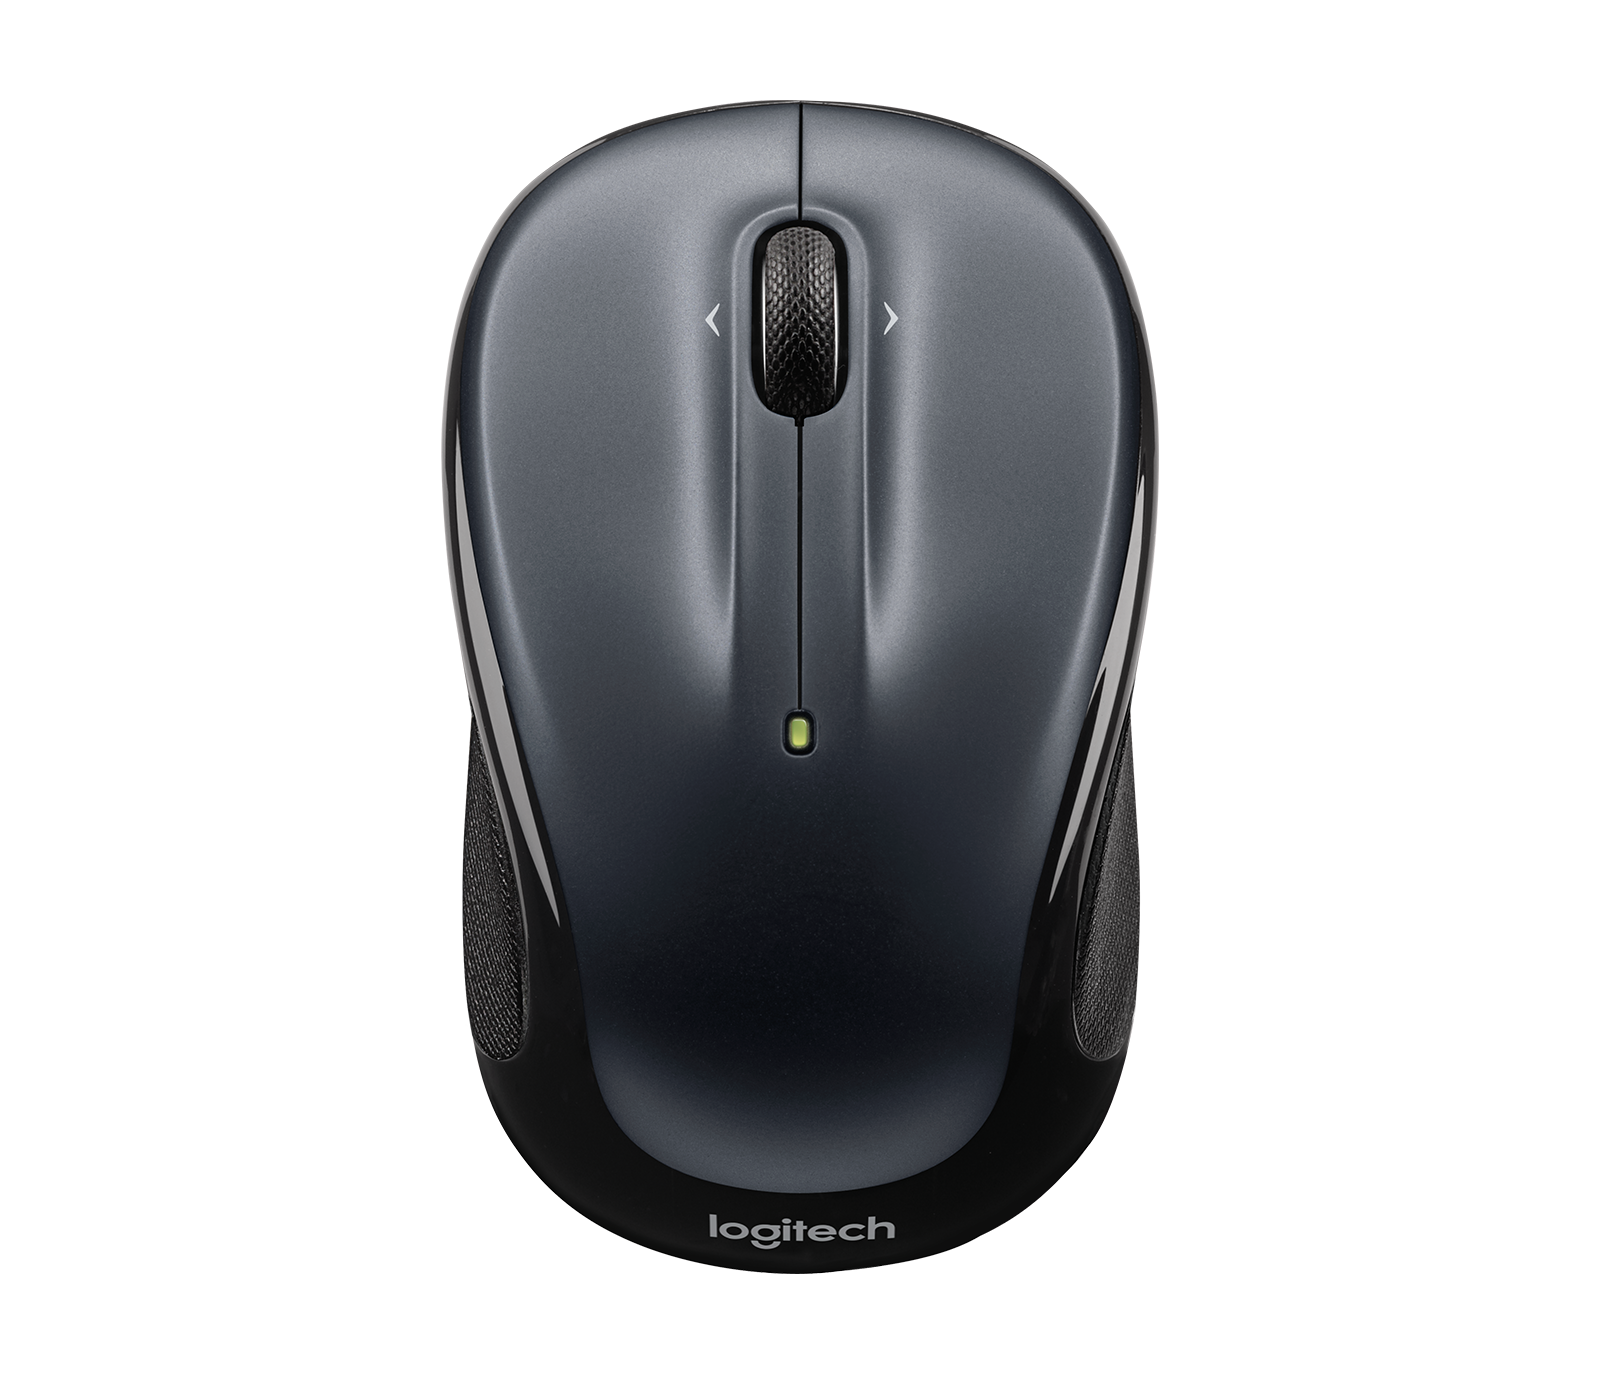 næve knude forbedre Logitech M325S Wireless Mouse - Multiple Color Choices